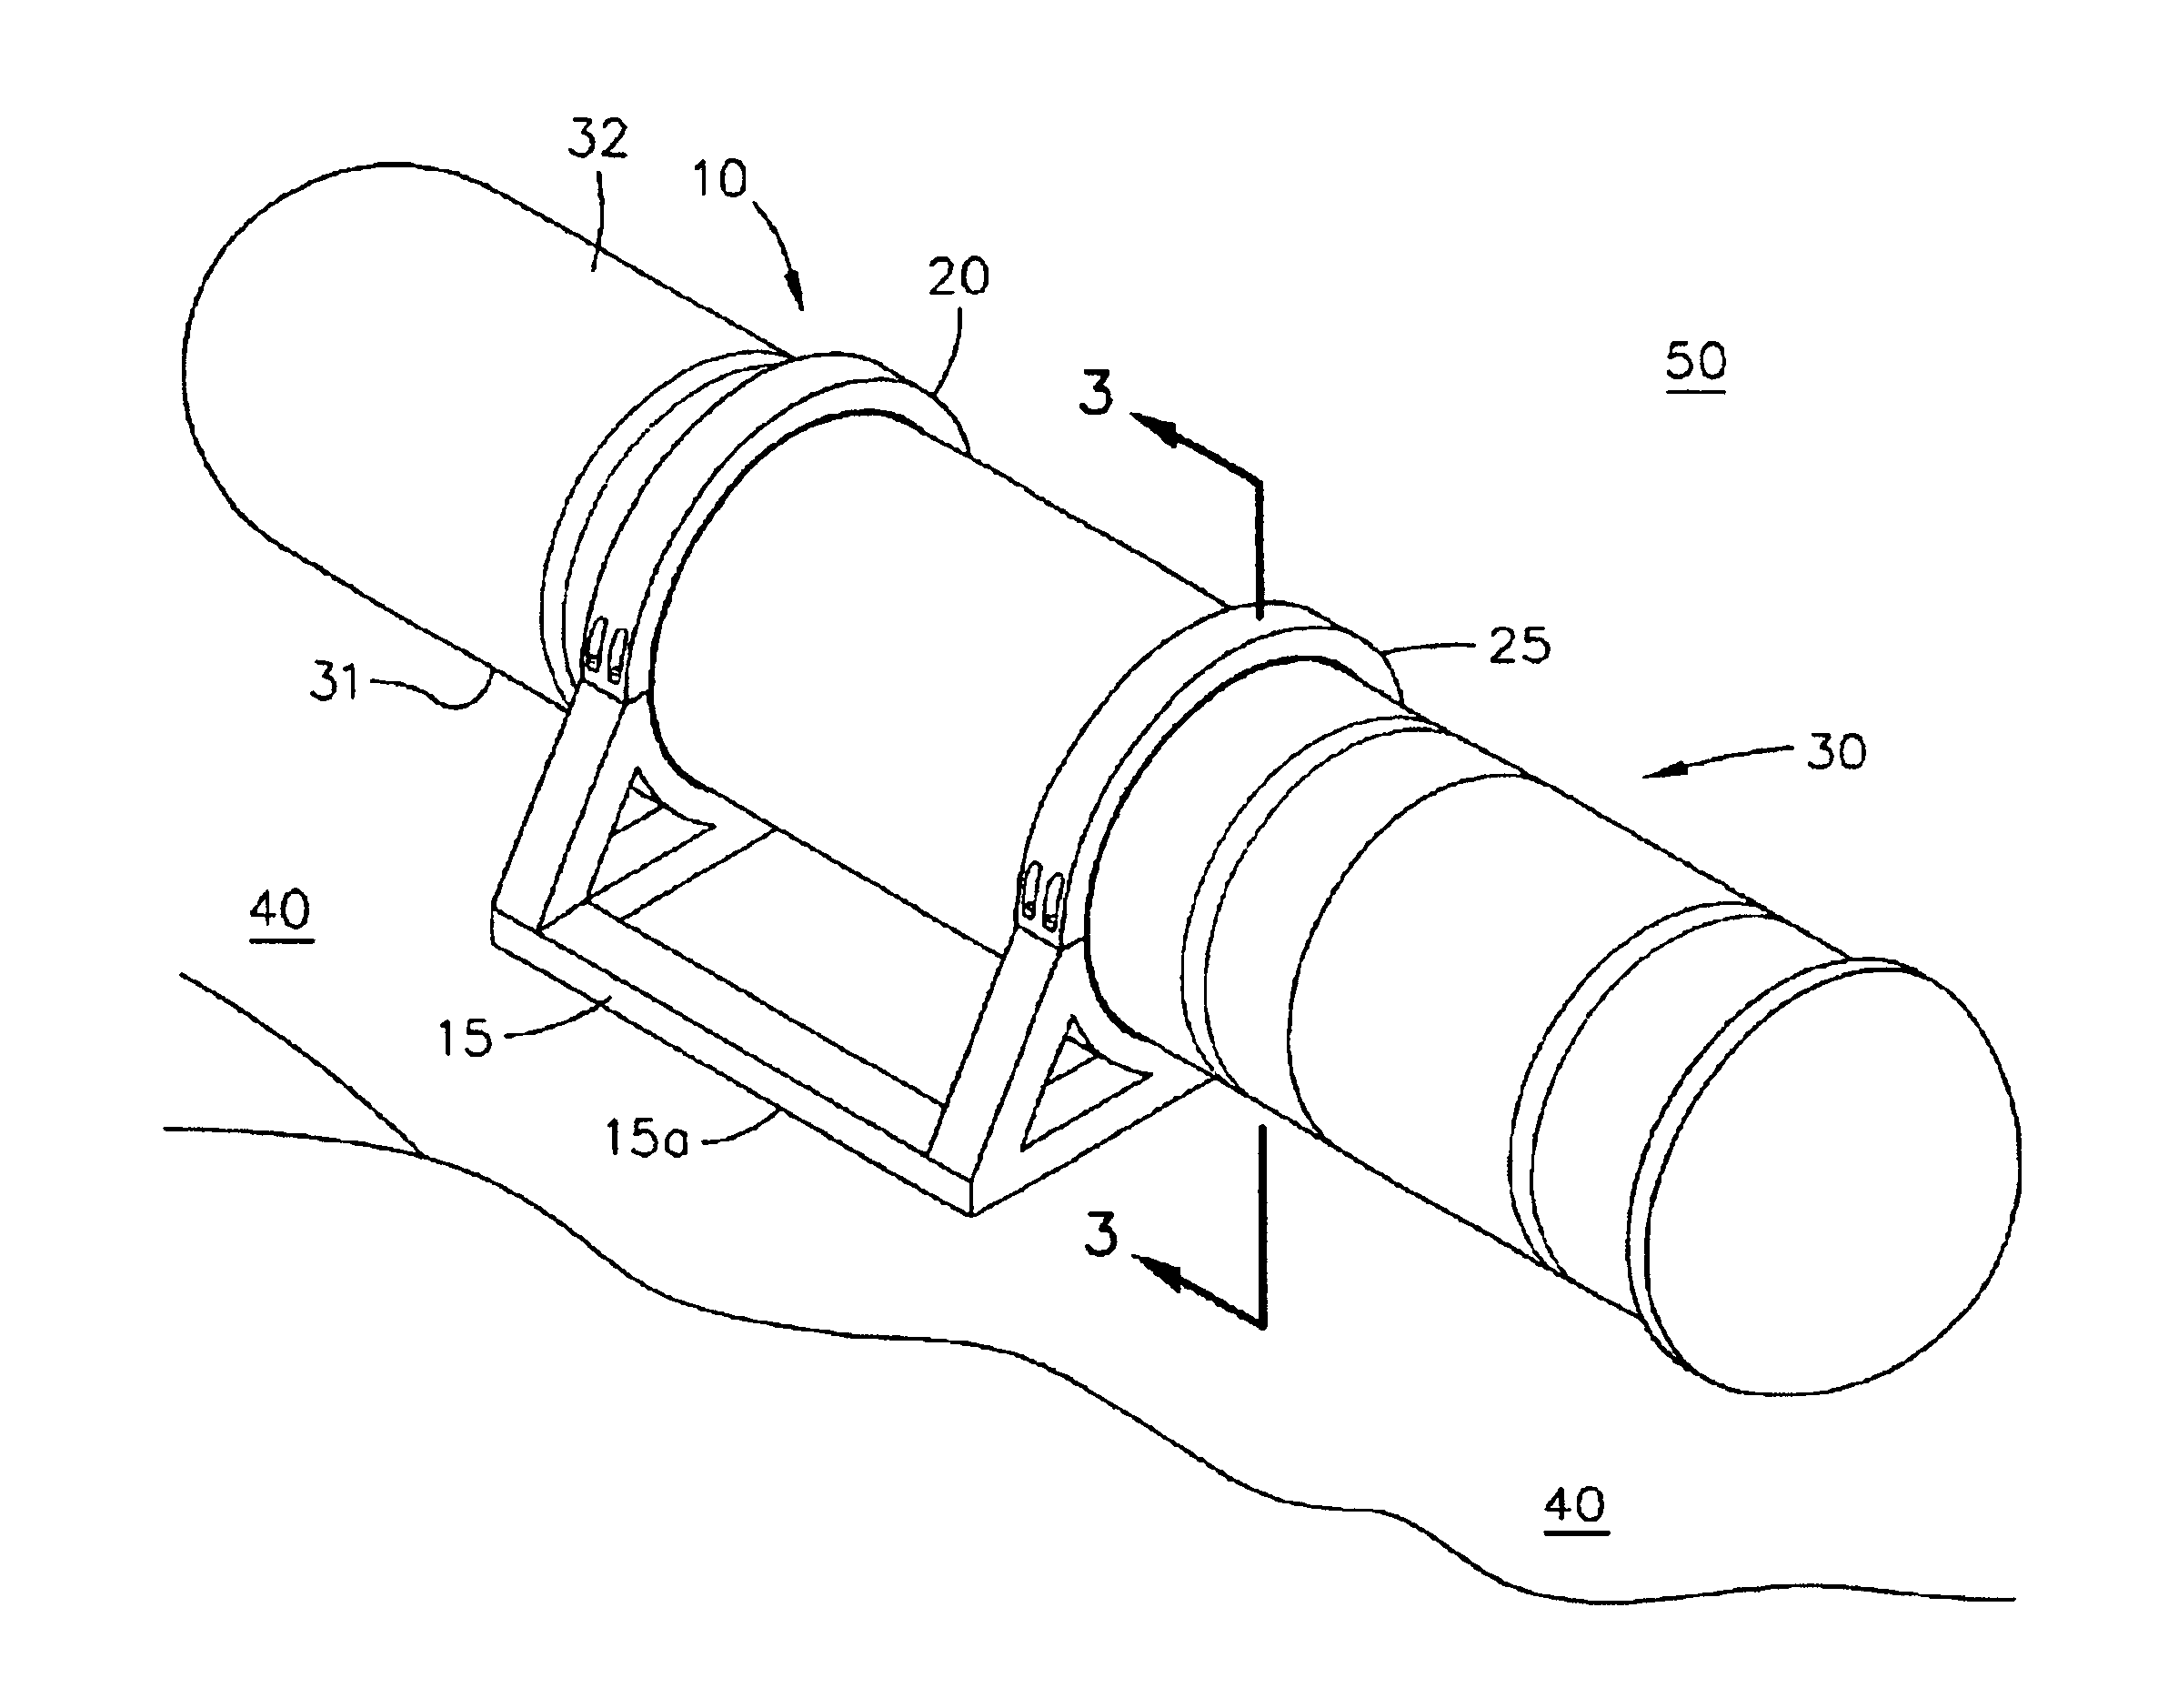 Combined stabilization bracket and mine system for gathering undersea data